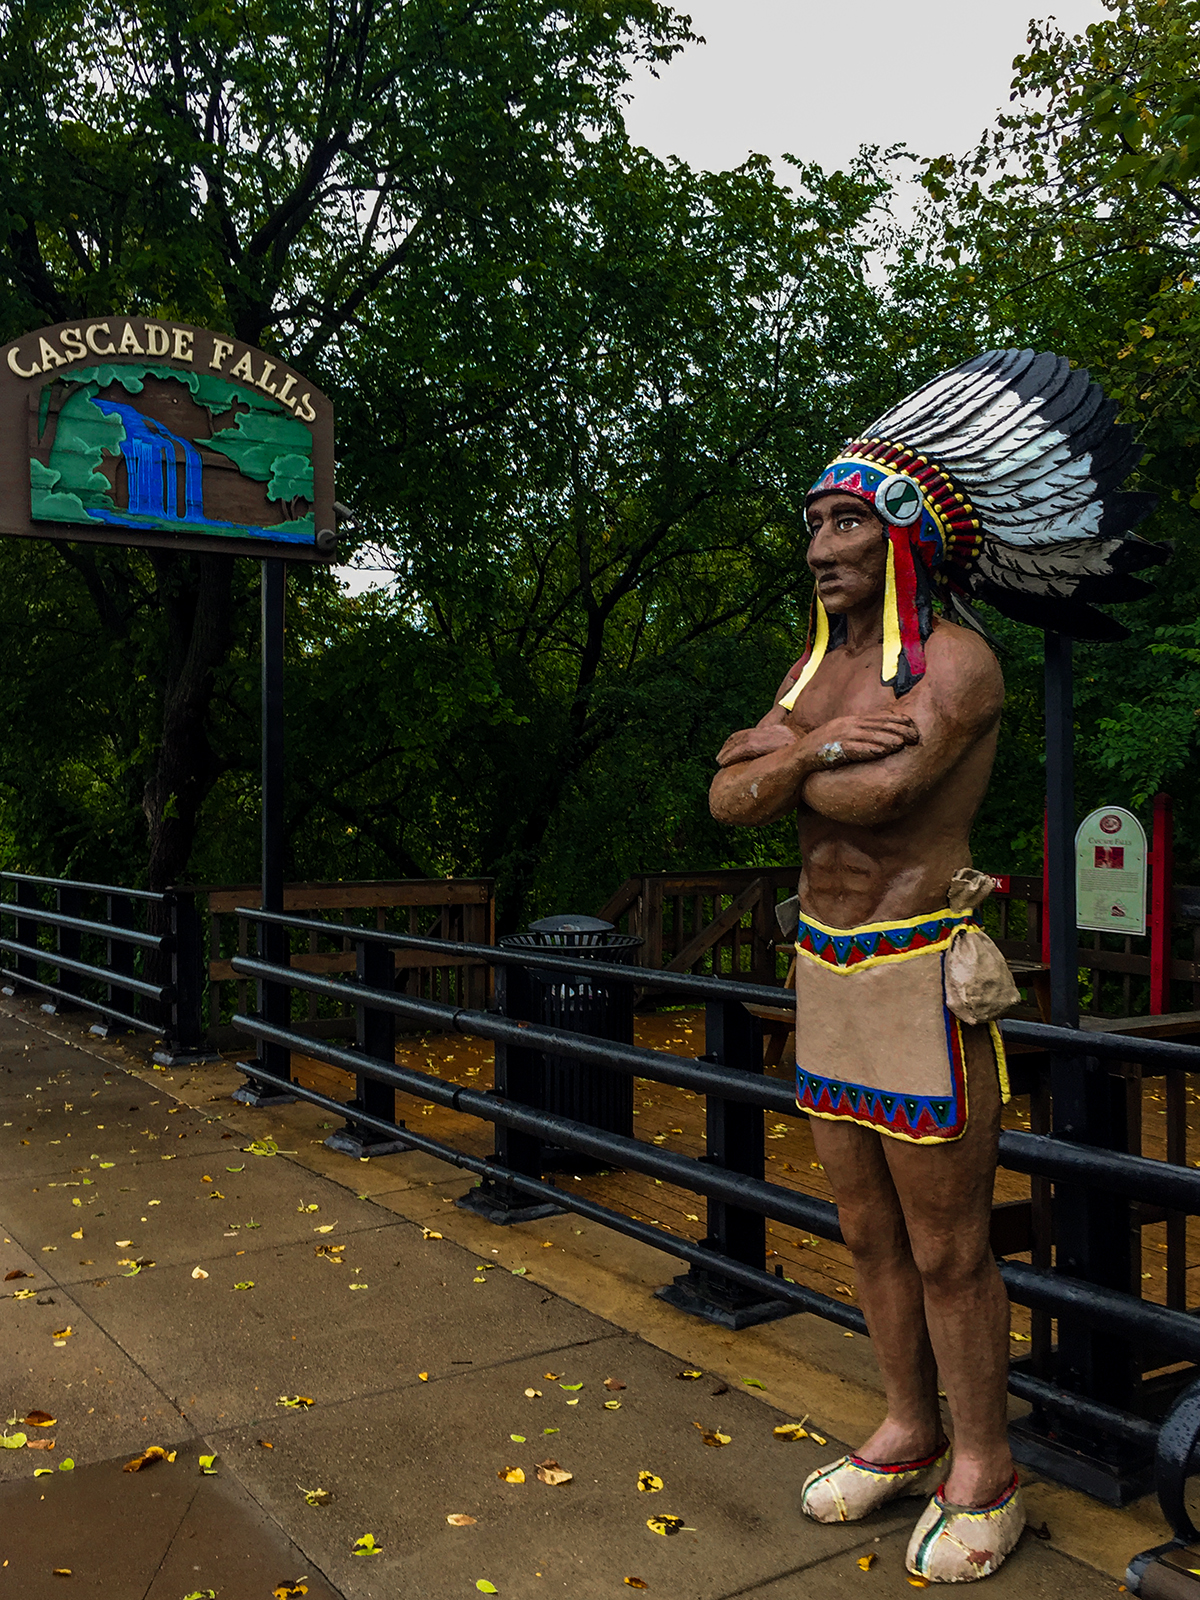 A Carved Figure of Chief Osceola at the trailhead of Cascade Falls and Wilkie Glen